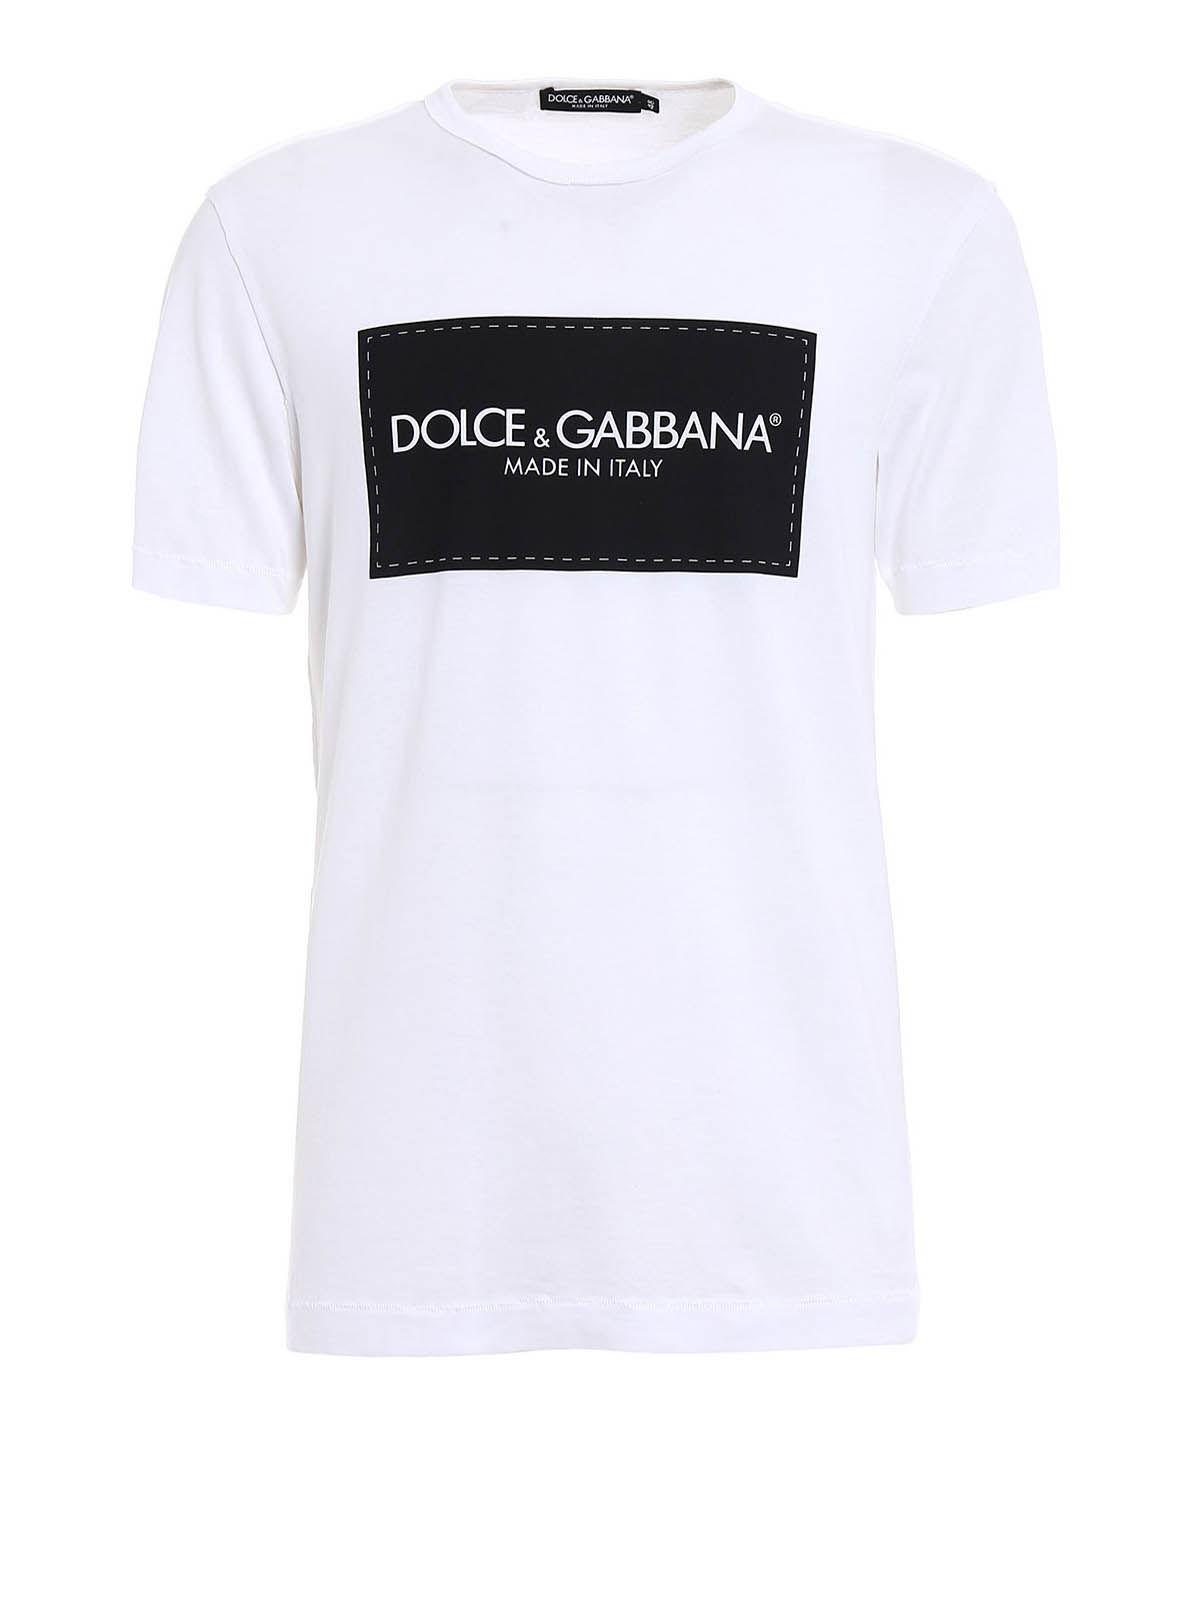 Dolce & Gabbana "d&g Made In Italy" Print T-shirt in White for Men - Lyst